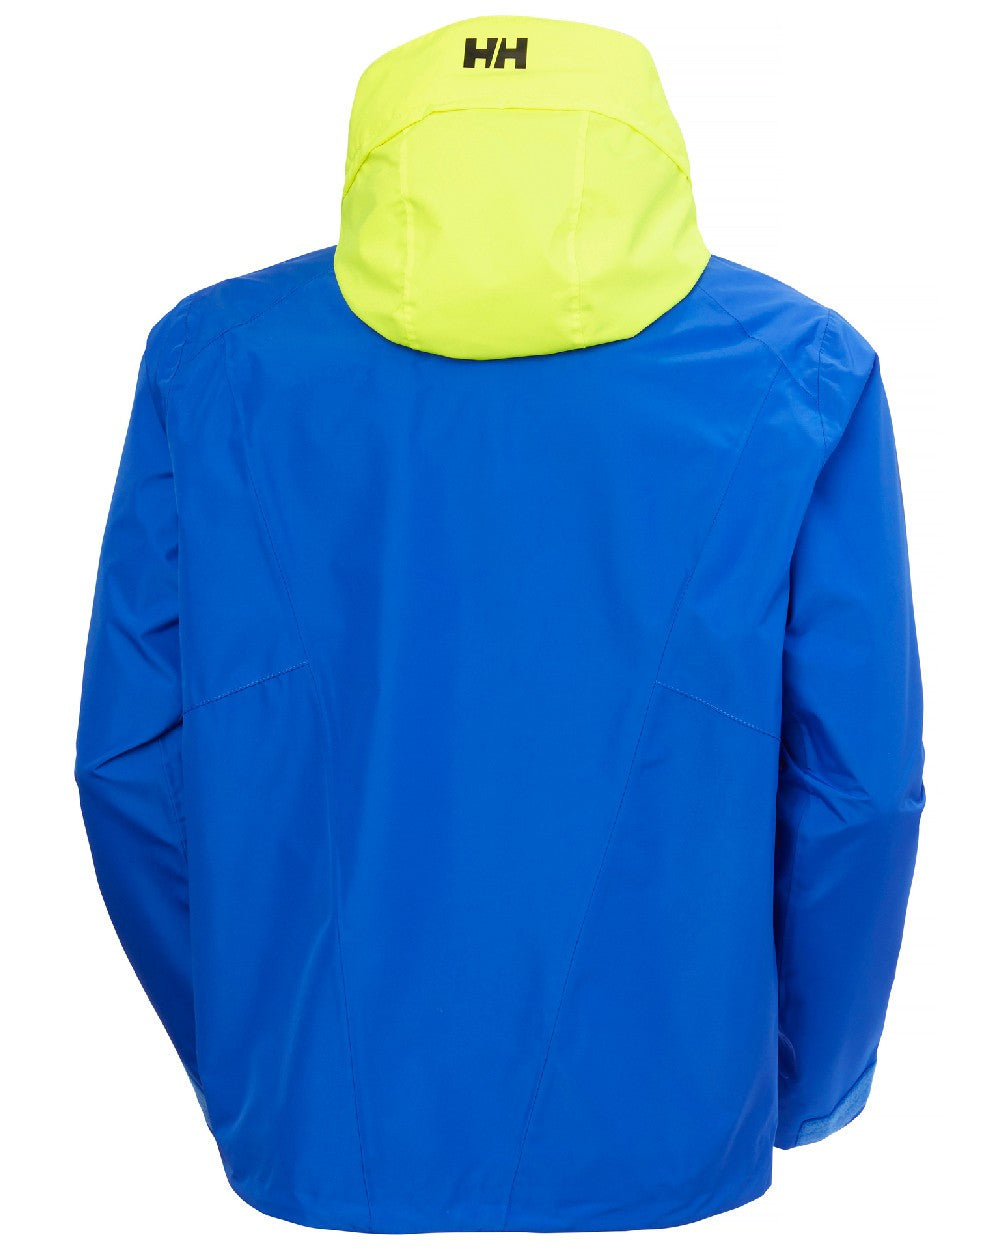 Cobalt 2.0 coloured Helly Hansen Mens Inshore Cup Sailing Jacket on white background 